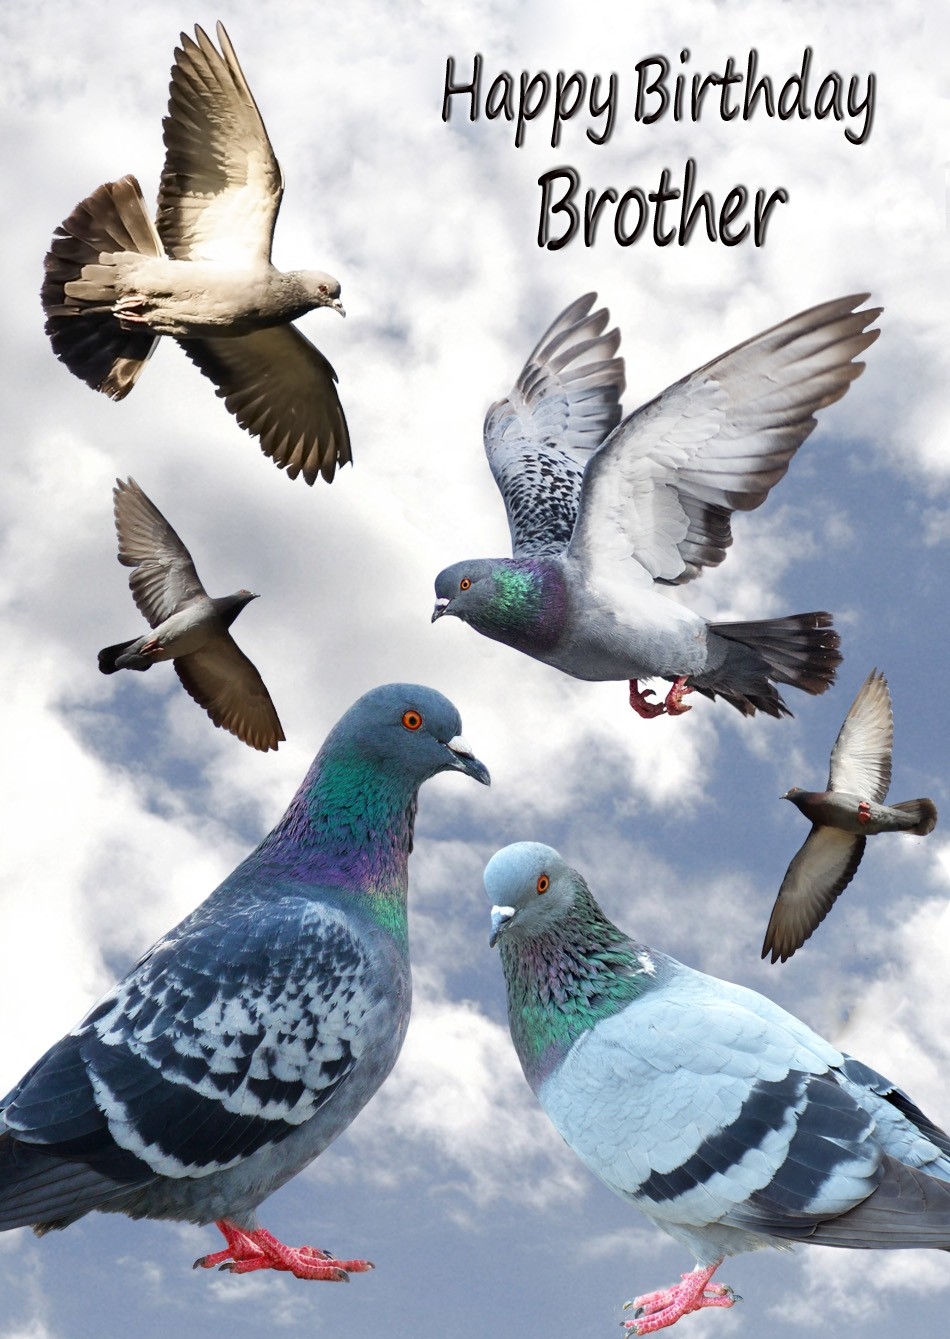 Racing Homing Pigeon Brother Birthday Card